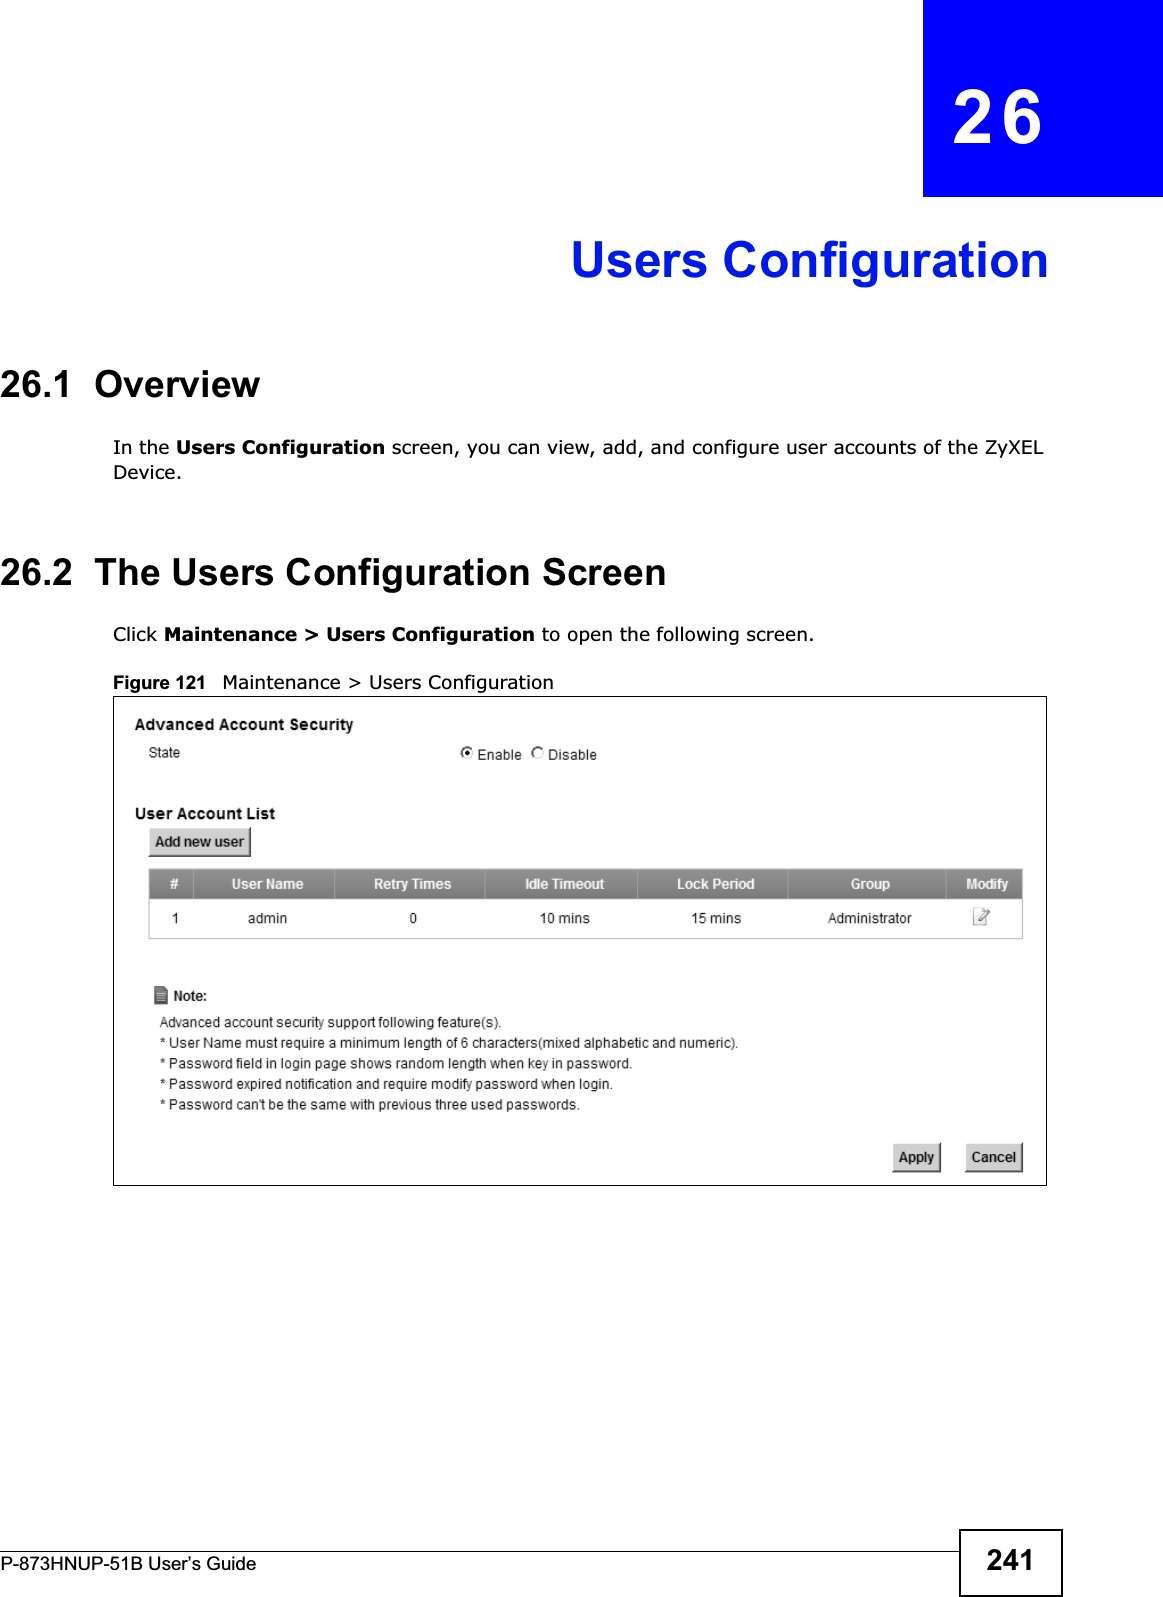 P-873HNUP-51B User’s Guide 241CHAPTER   26Users Configuration26.1  Overview In the Users Configuration screen, you can view, add, and configure user accounts of the ZyXEL Device. 26.2  The Users Configuration ScreenClick Maintenance &gt; Users Configuration to open the following screen.Figure 121   Maintenance &gt; Users Configuration